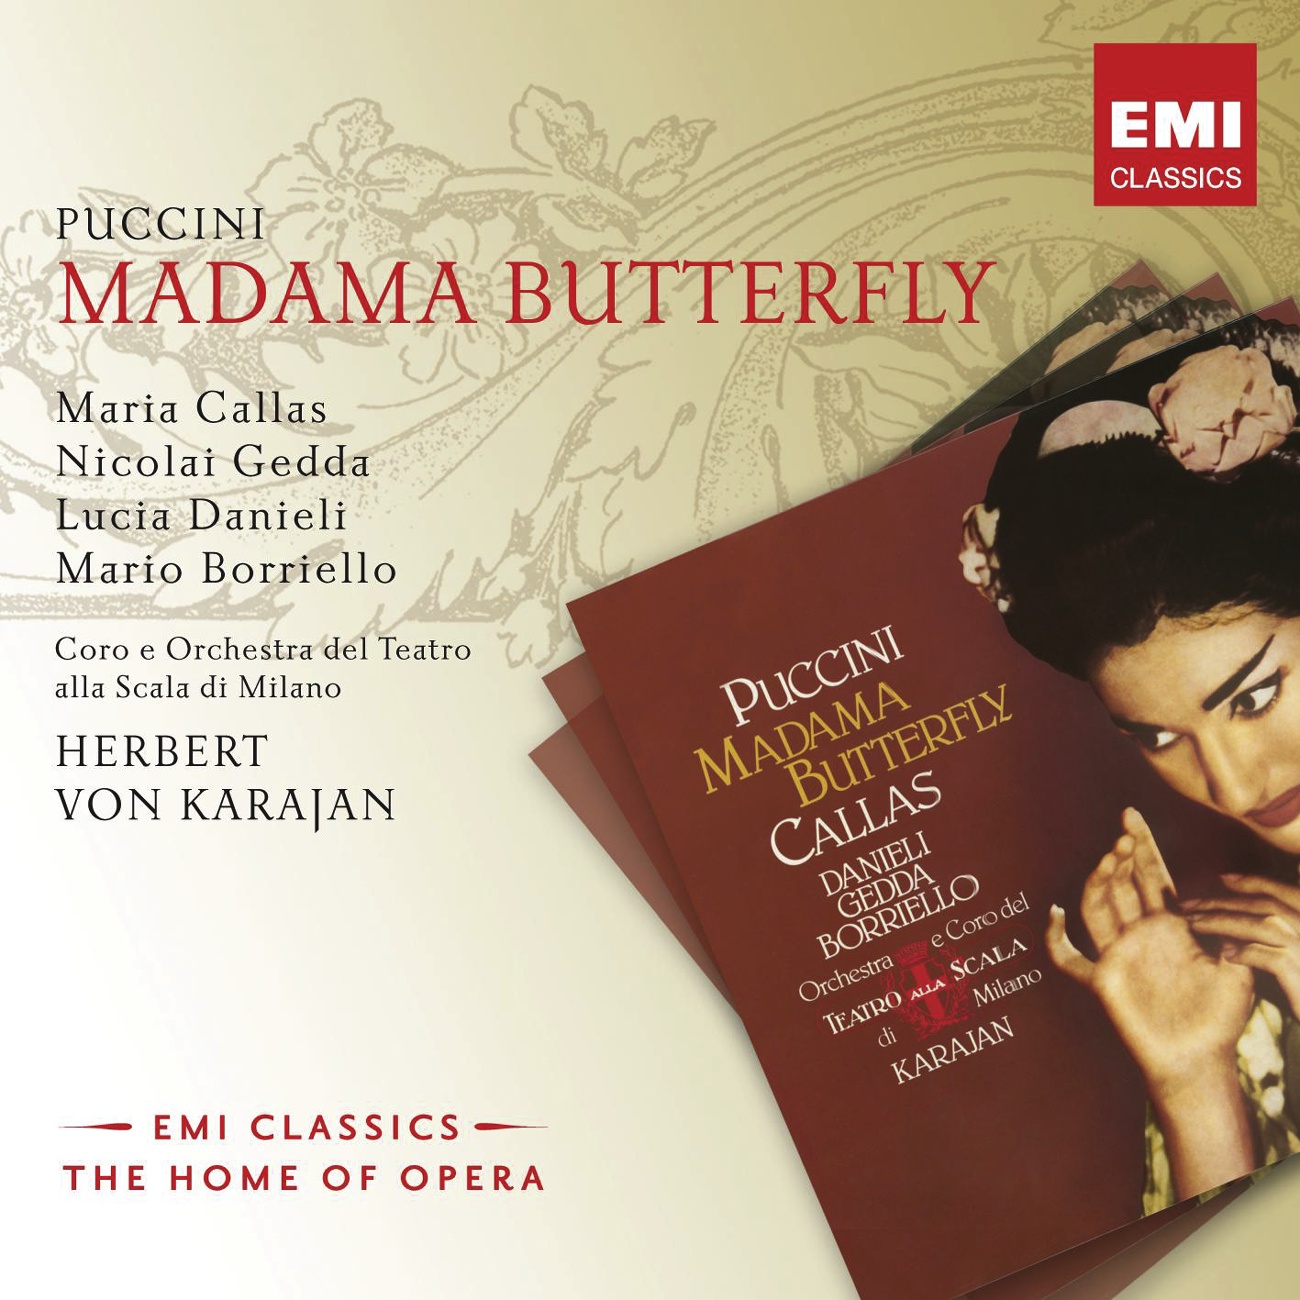 Madama Butterfly (2008 Remastered Version), Act I: Ed eccoci in famigila